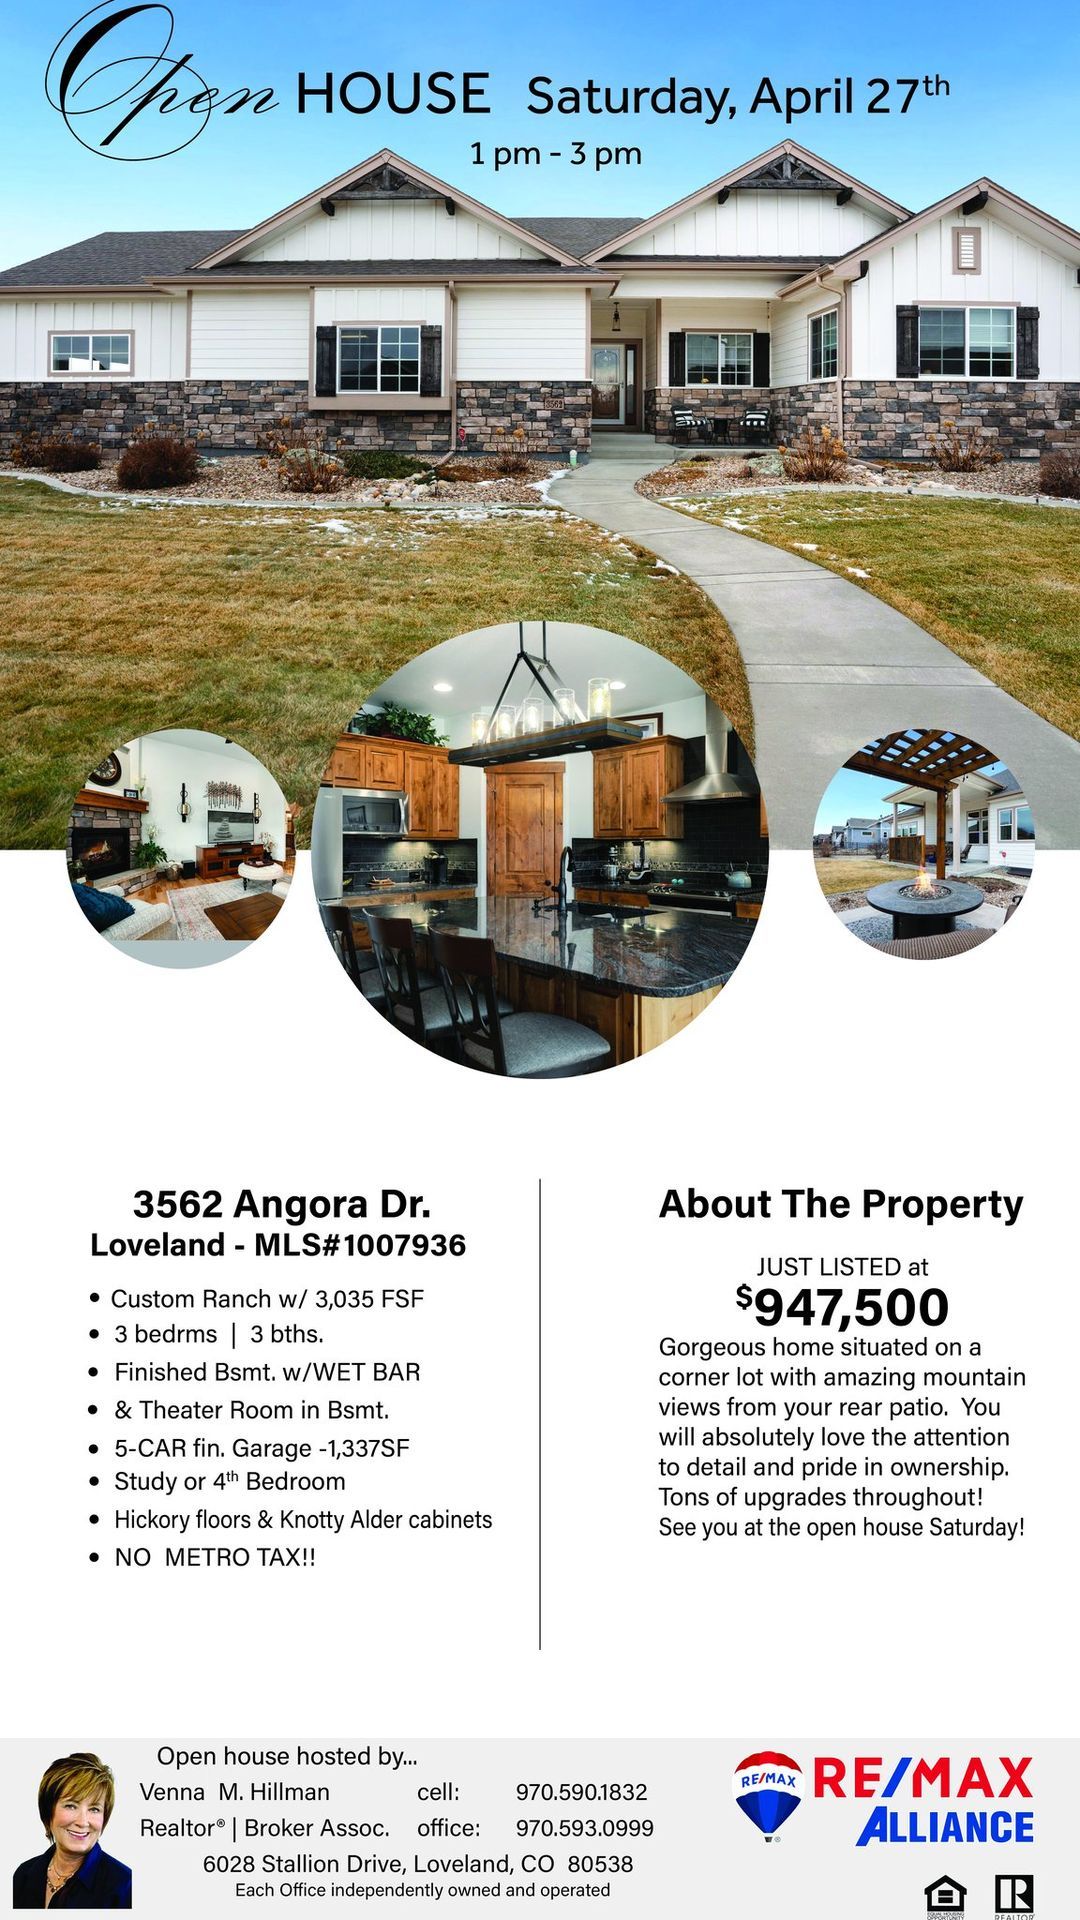 Ask Me Anything About This Great Property!